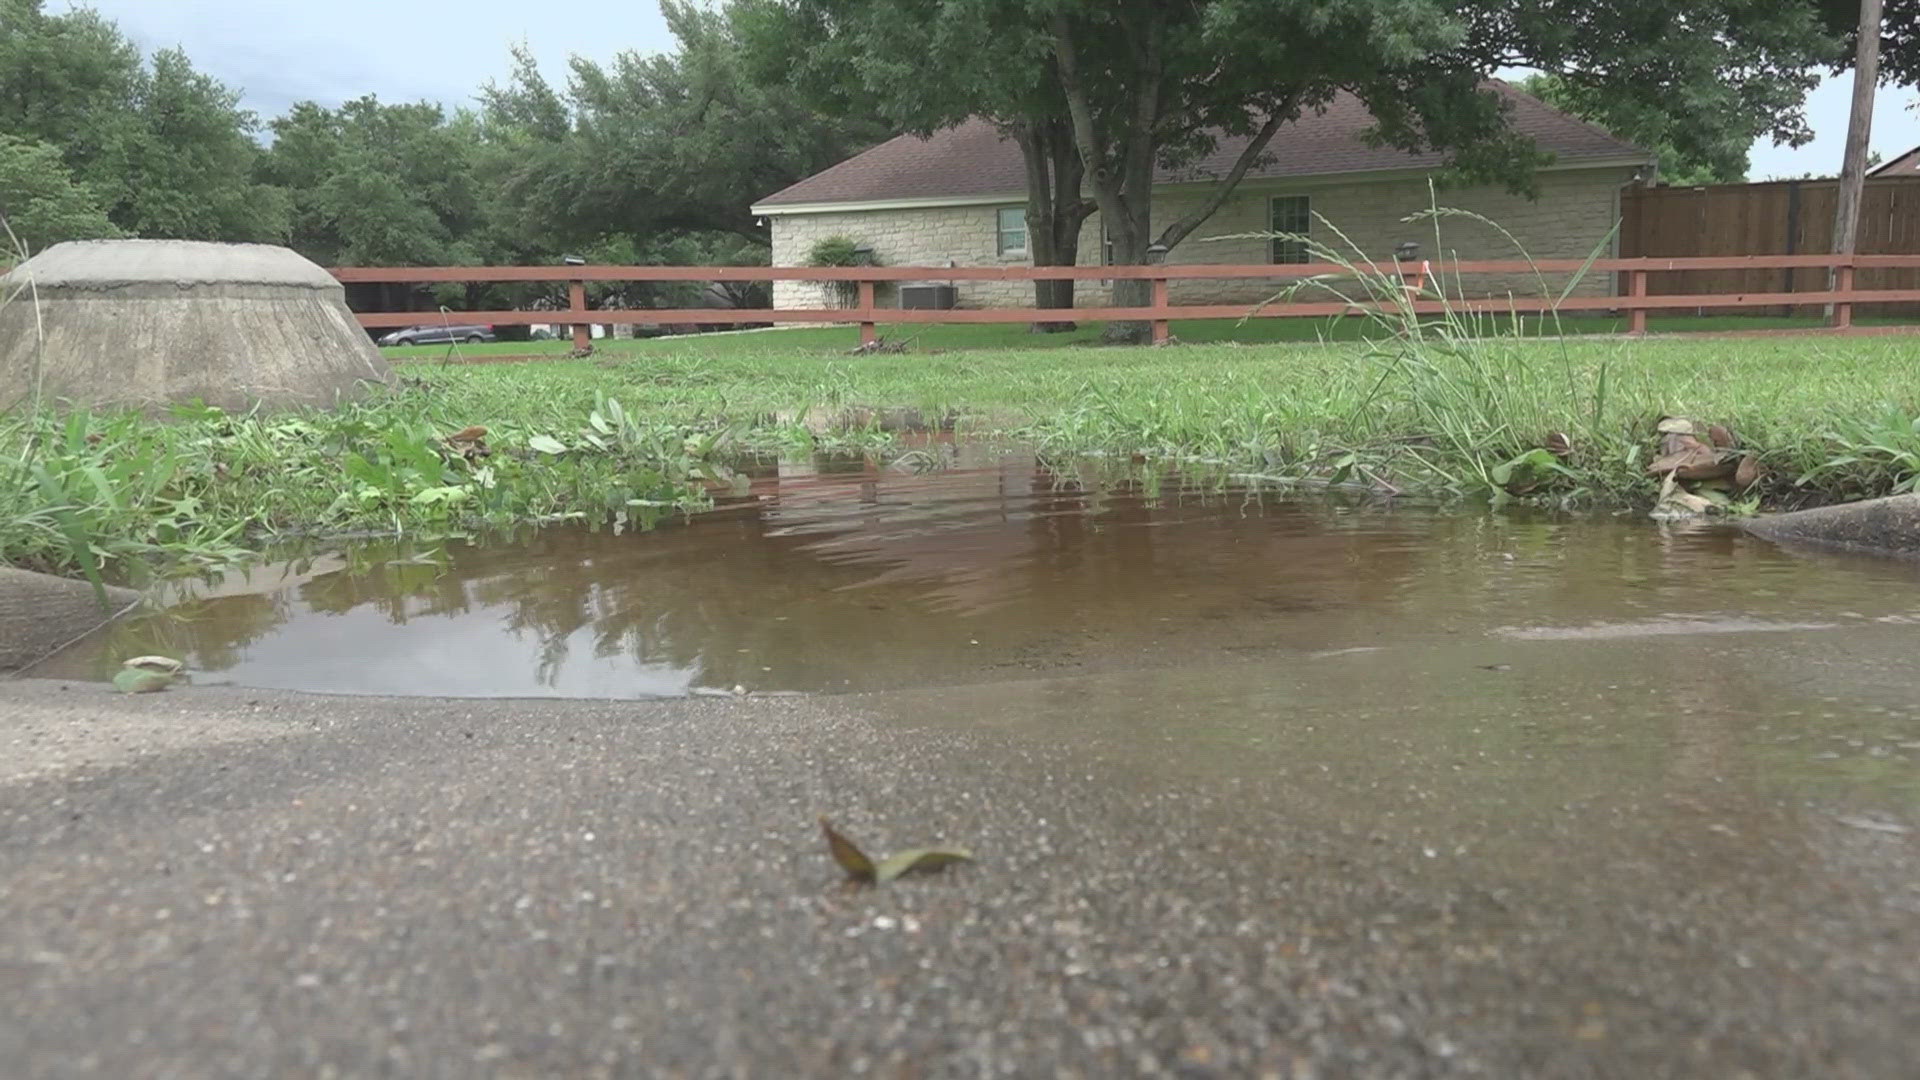 Residents on Sunset Drive in Waco say when it rains, it often causes flooding on their property.